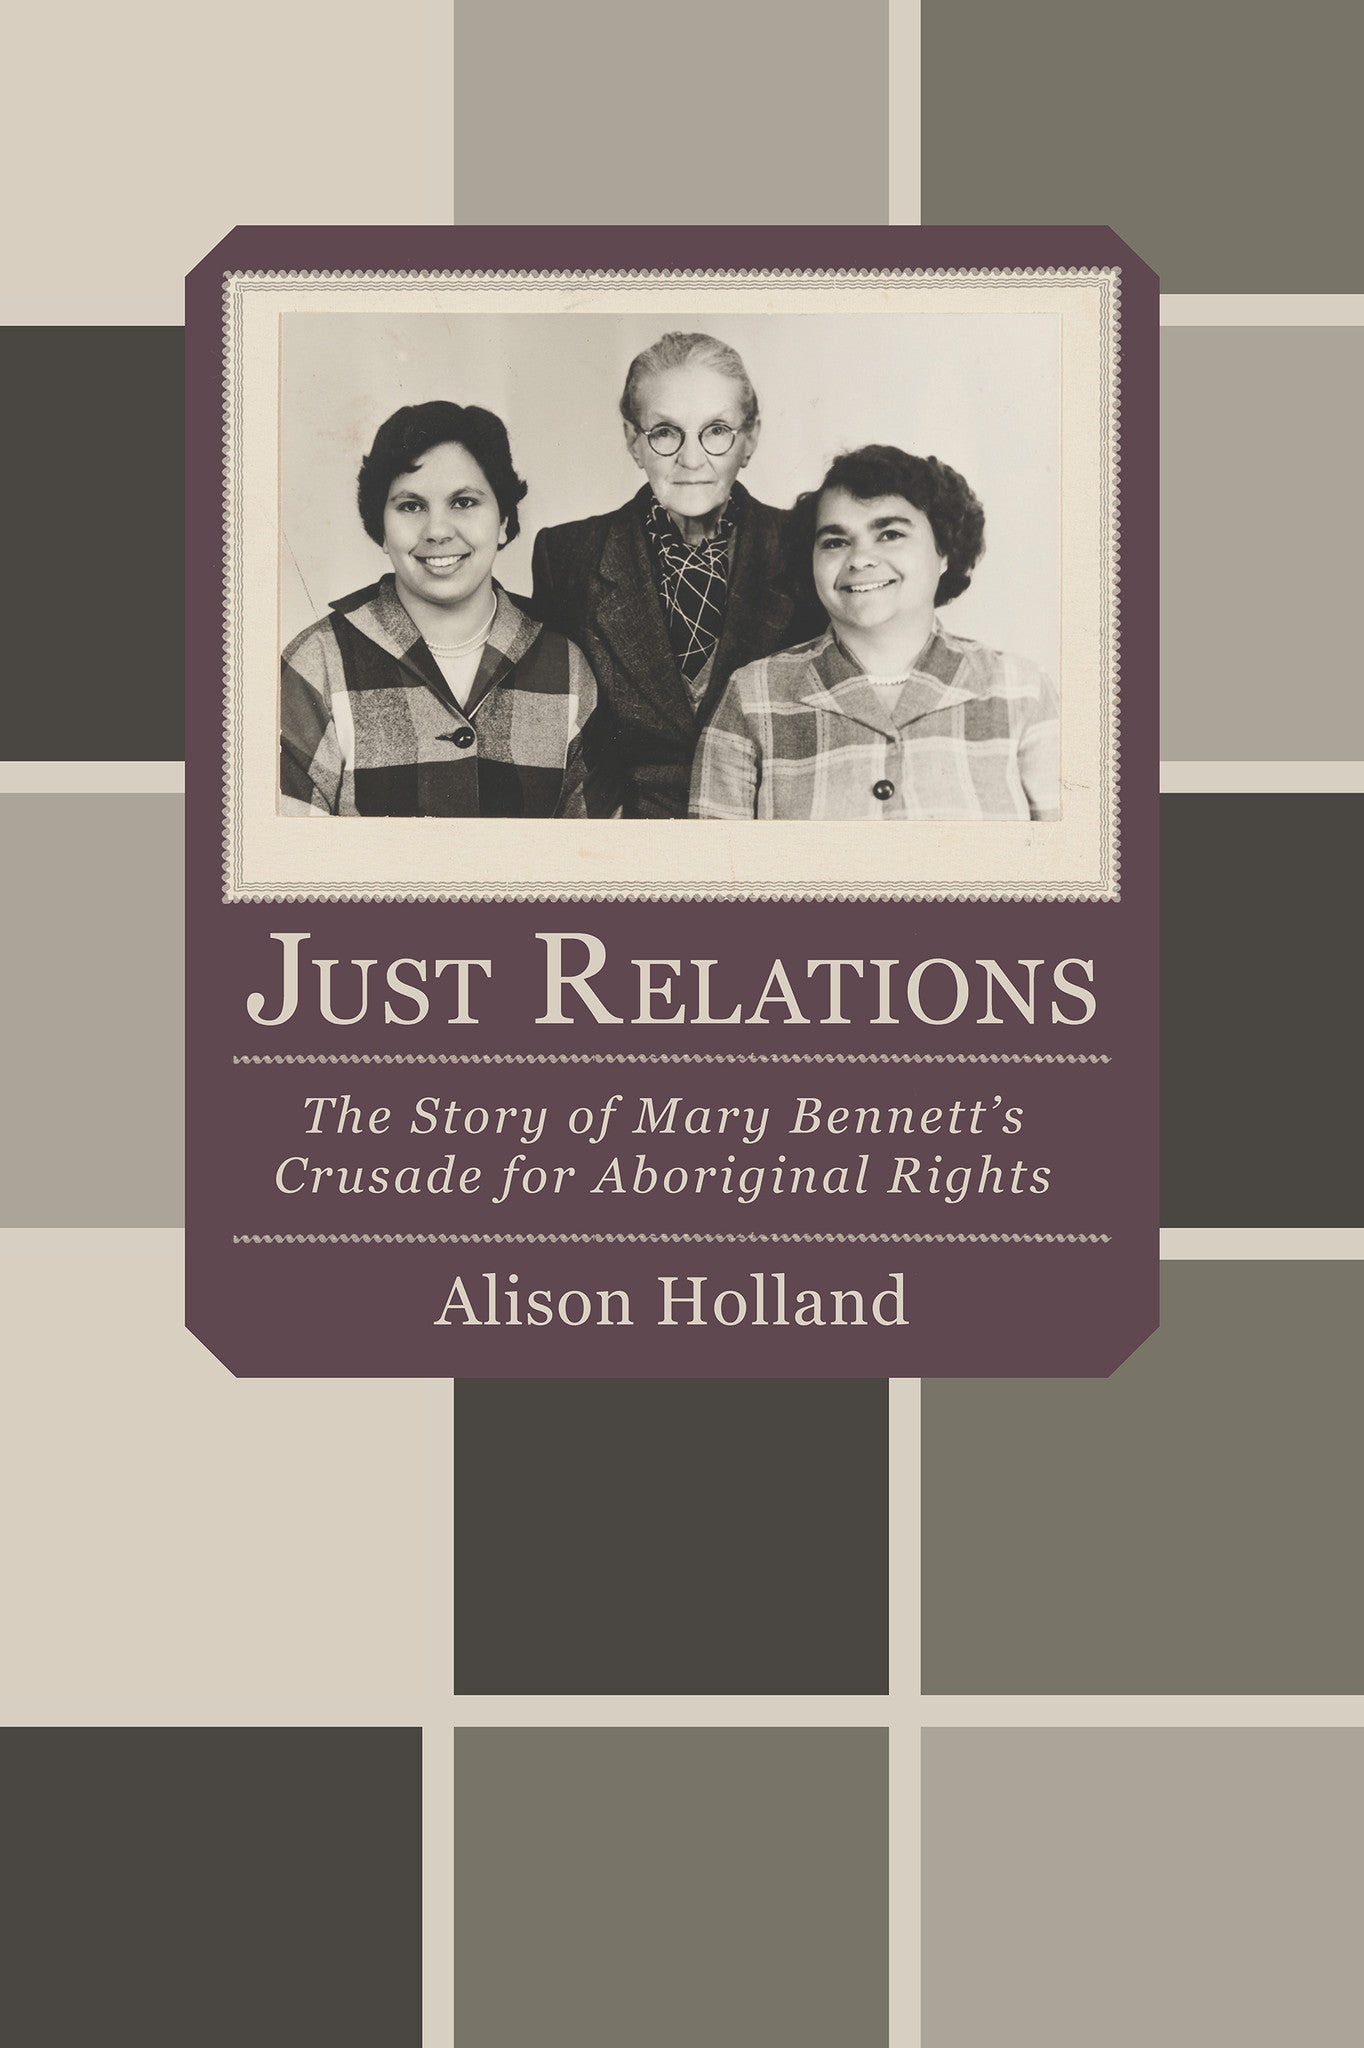 Just Relations: The story of Mary Bennett's crusade for Aboriginal rights